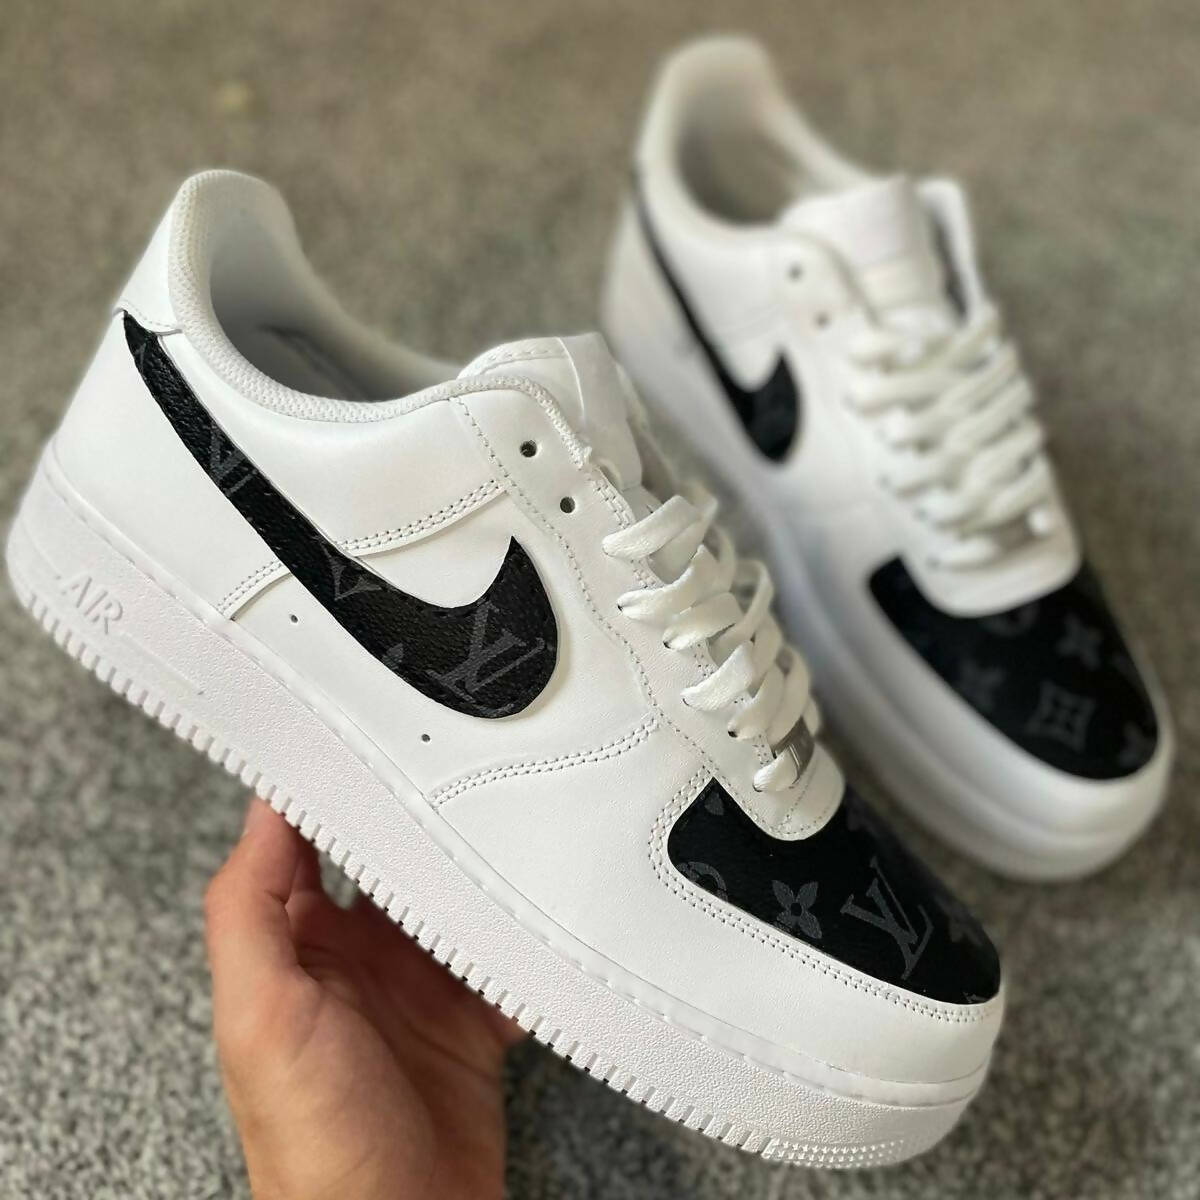 Black LV inspired Air Force 1